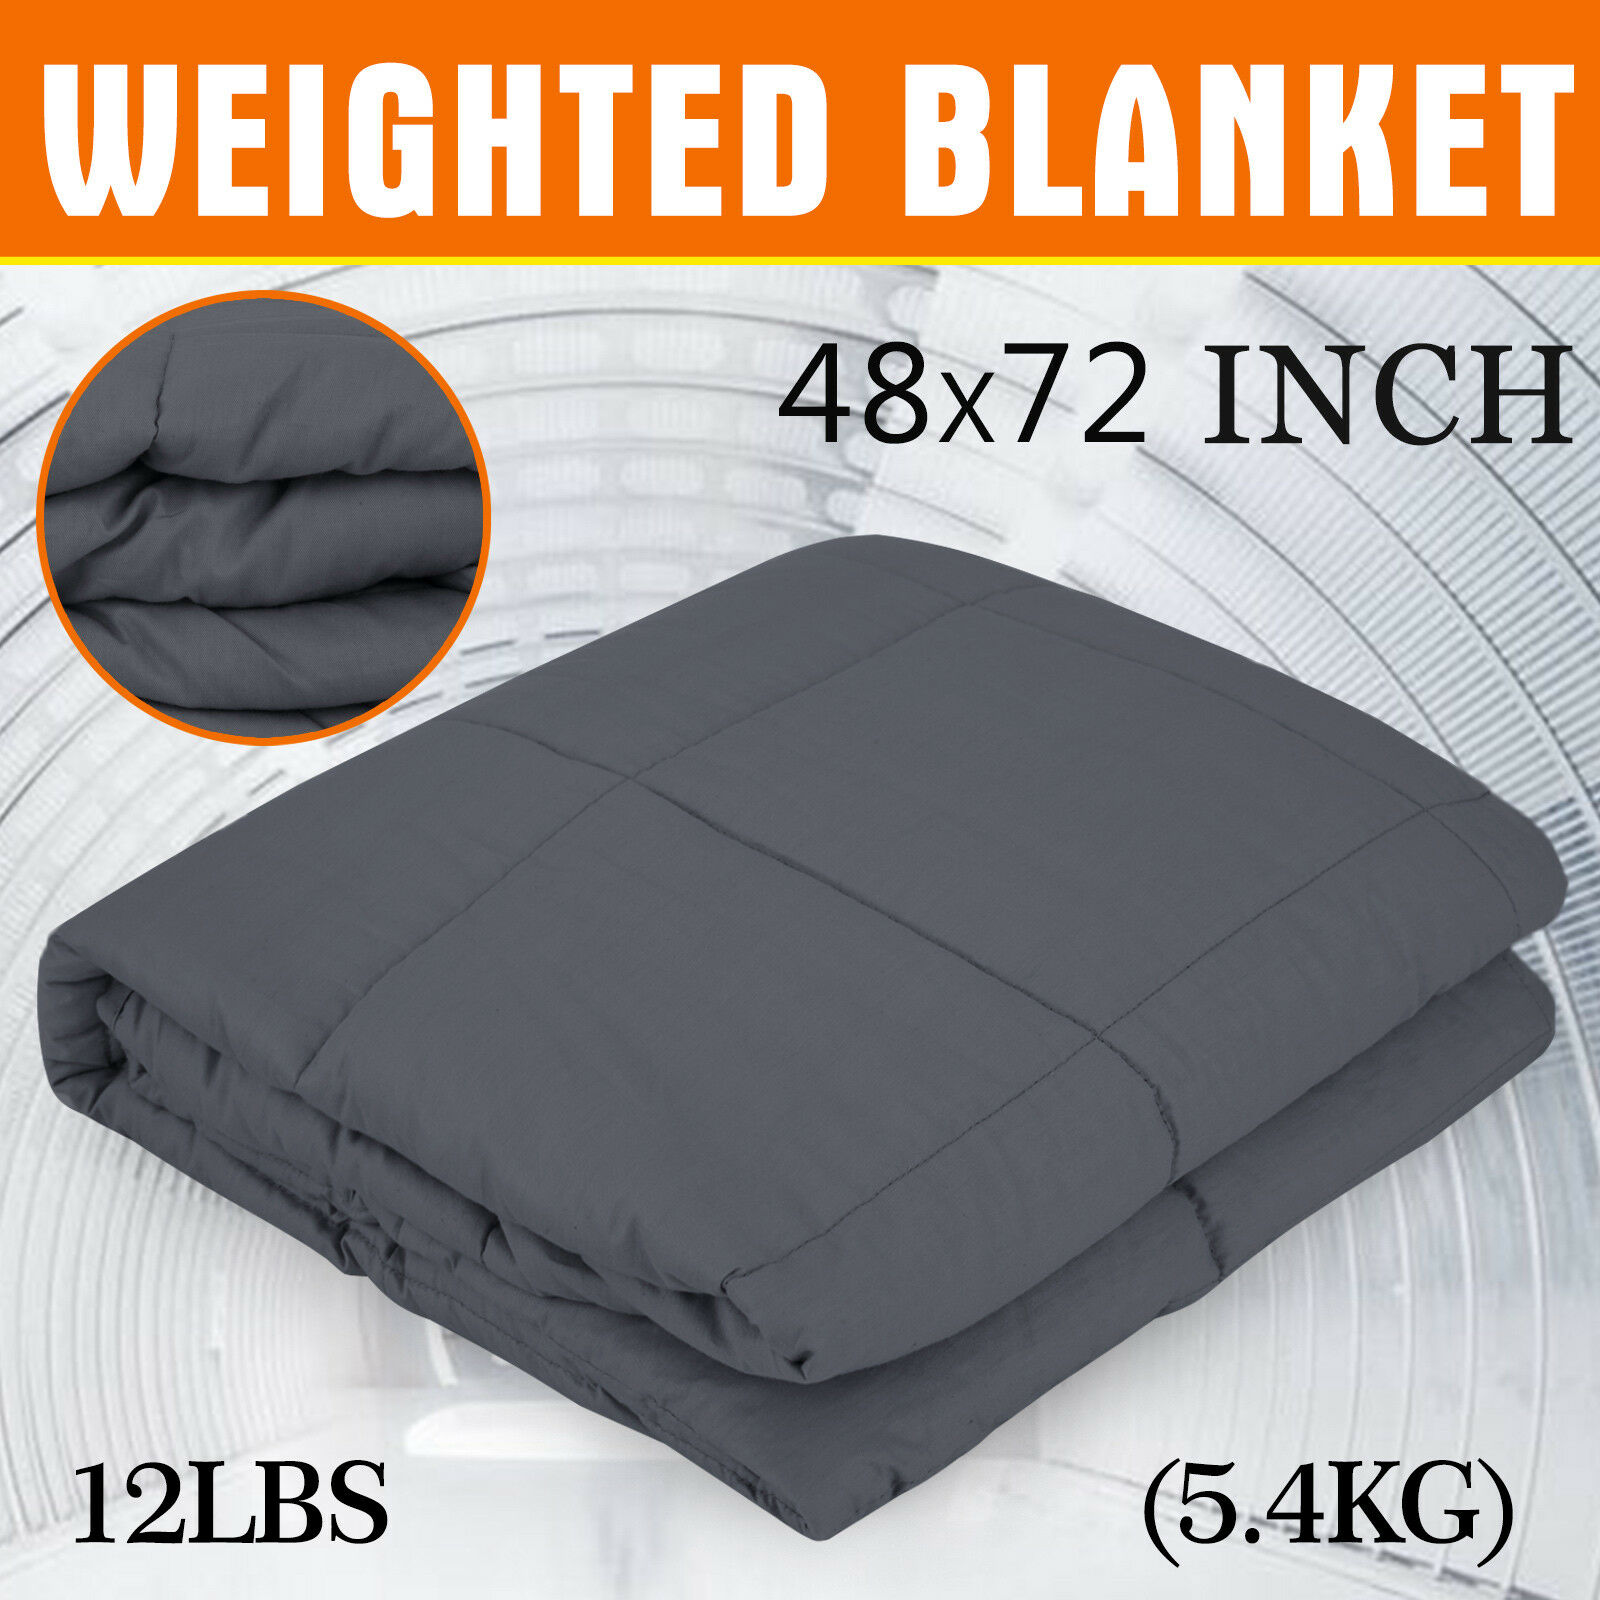 Weighted Blanket 10lbs 40"x60" Non-toxic Glass Beads 100% Breathable